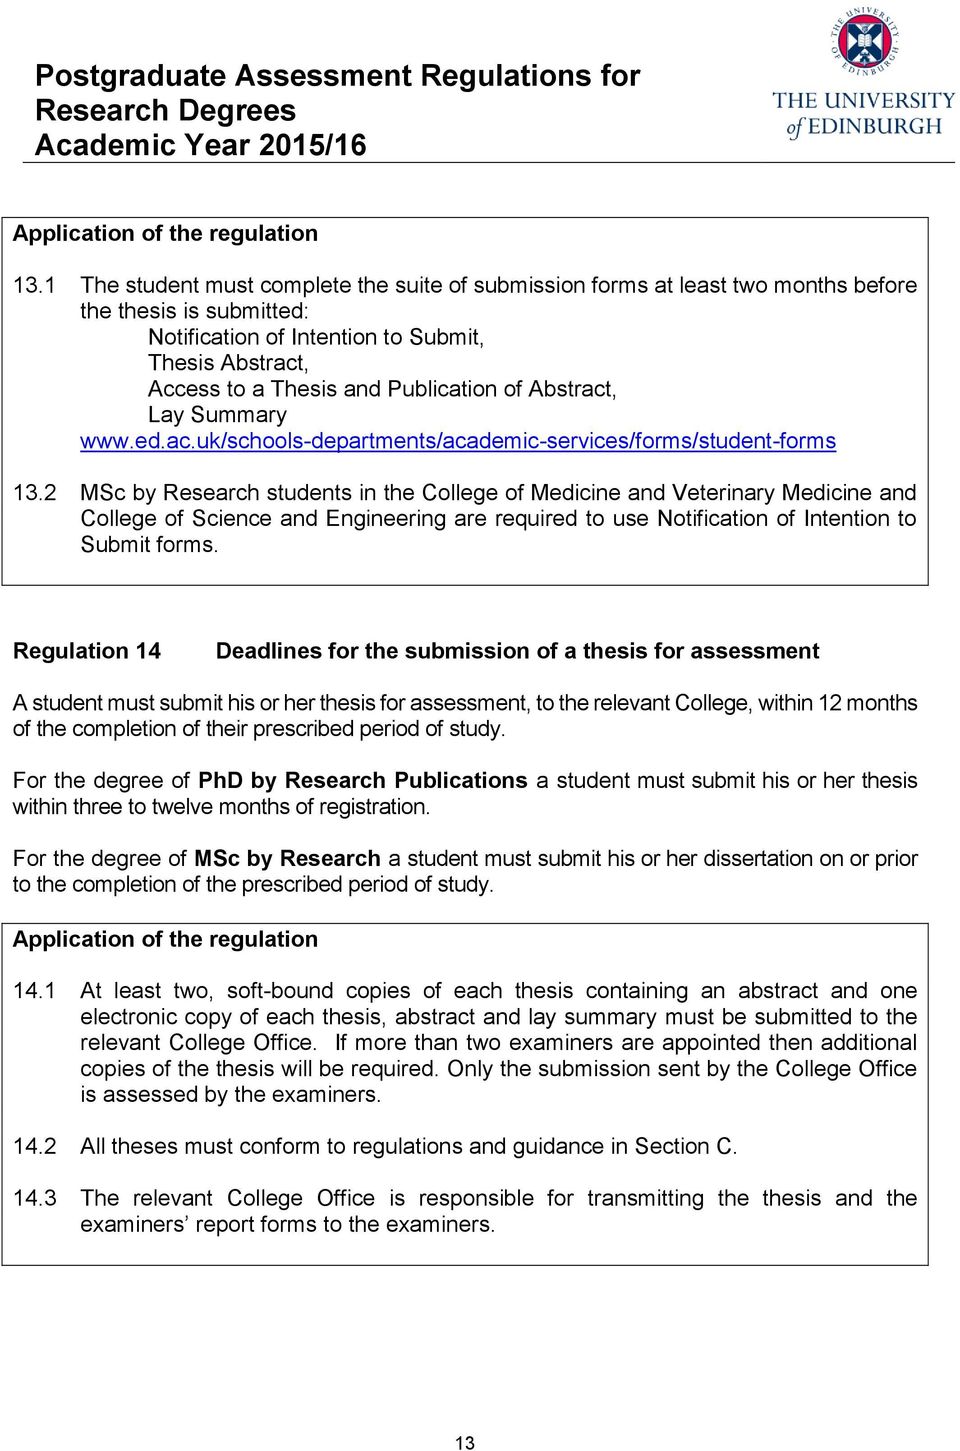 2 MSc by Research students in the College of Medicine and Veterinary Medicine and College of Science and Engineering are required to use Notification of Intention to Submit forms.